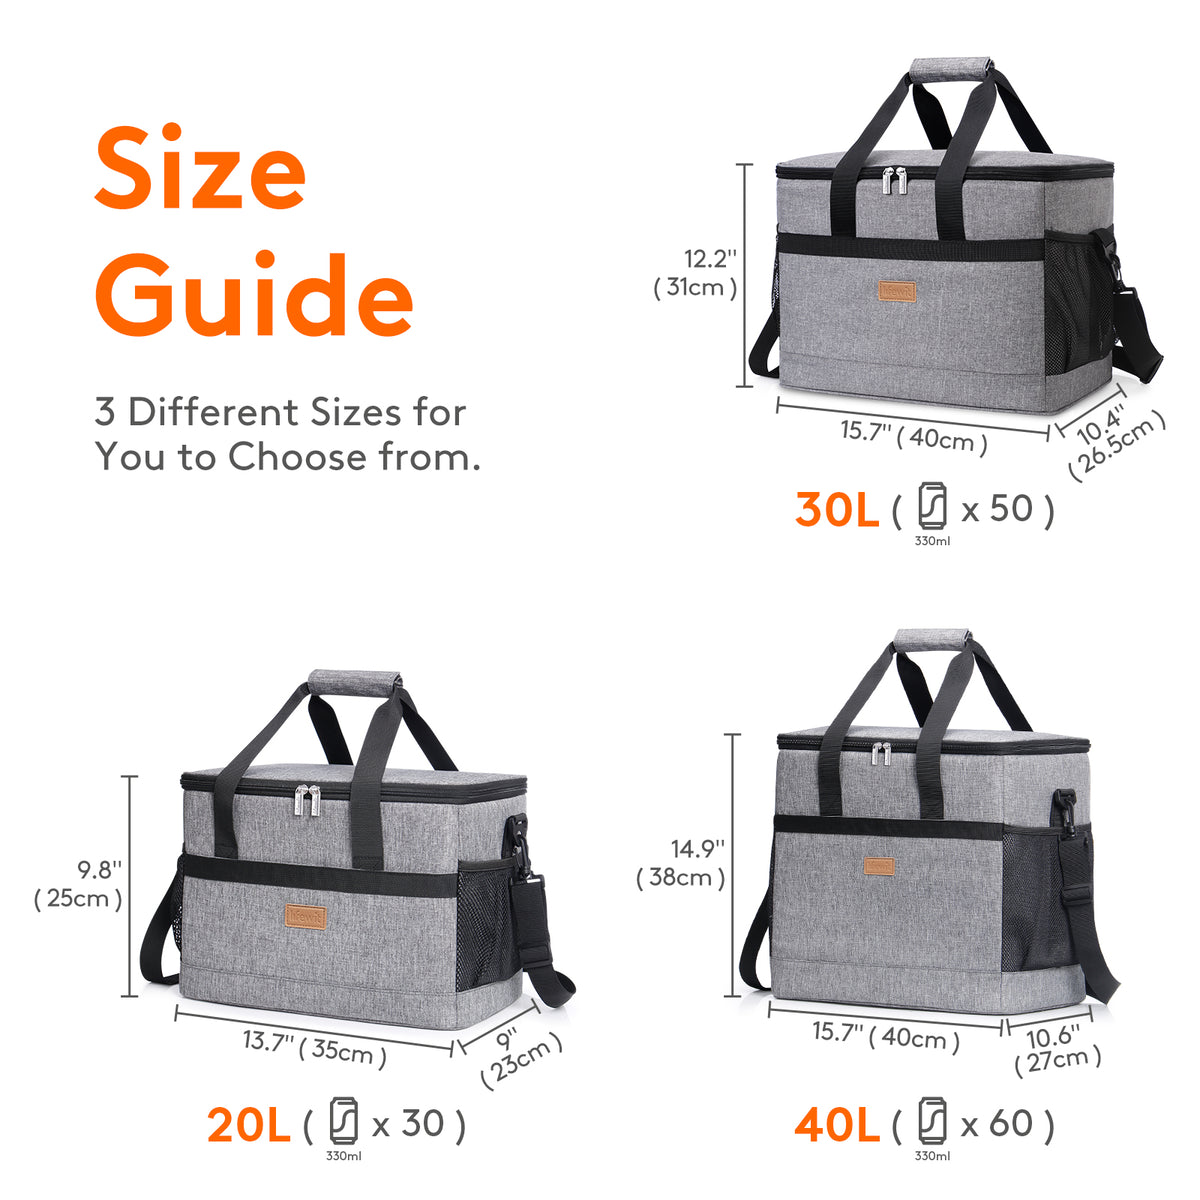 The Lifewit Insulated Cooler Bag Is 45% Off at